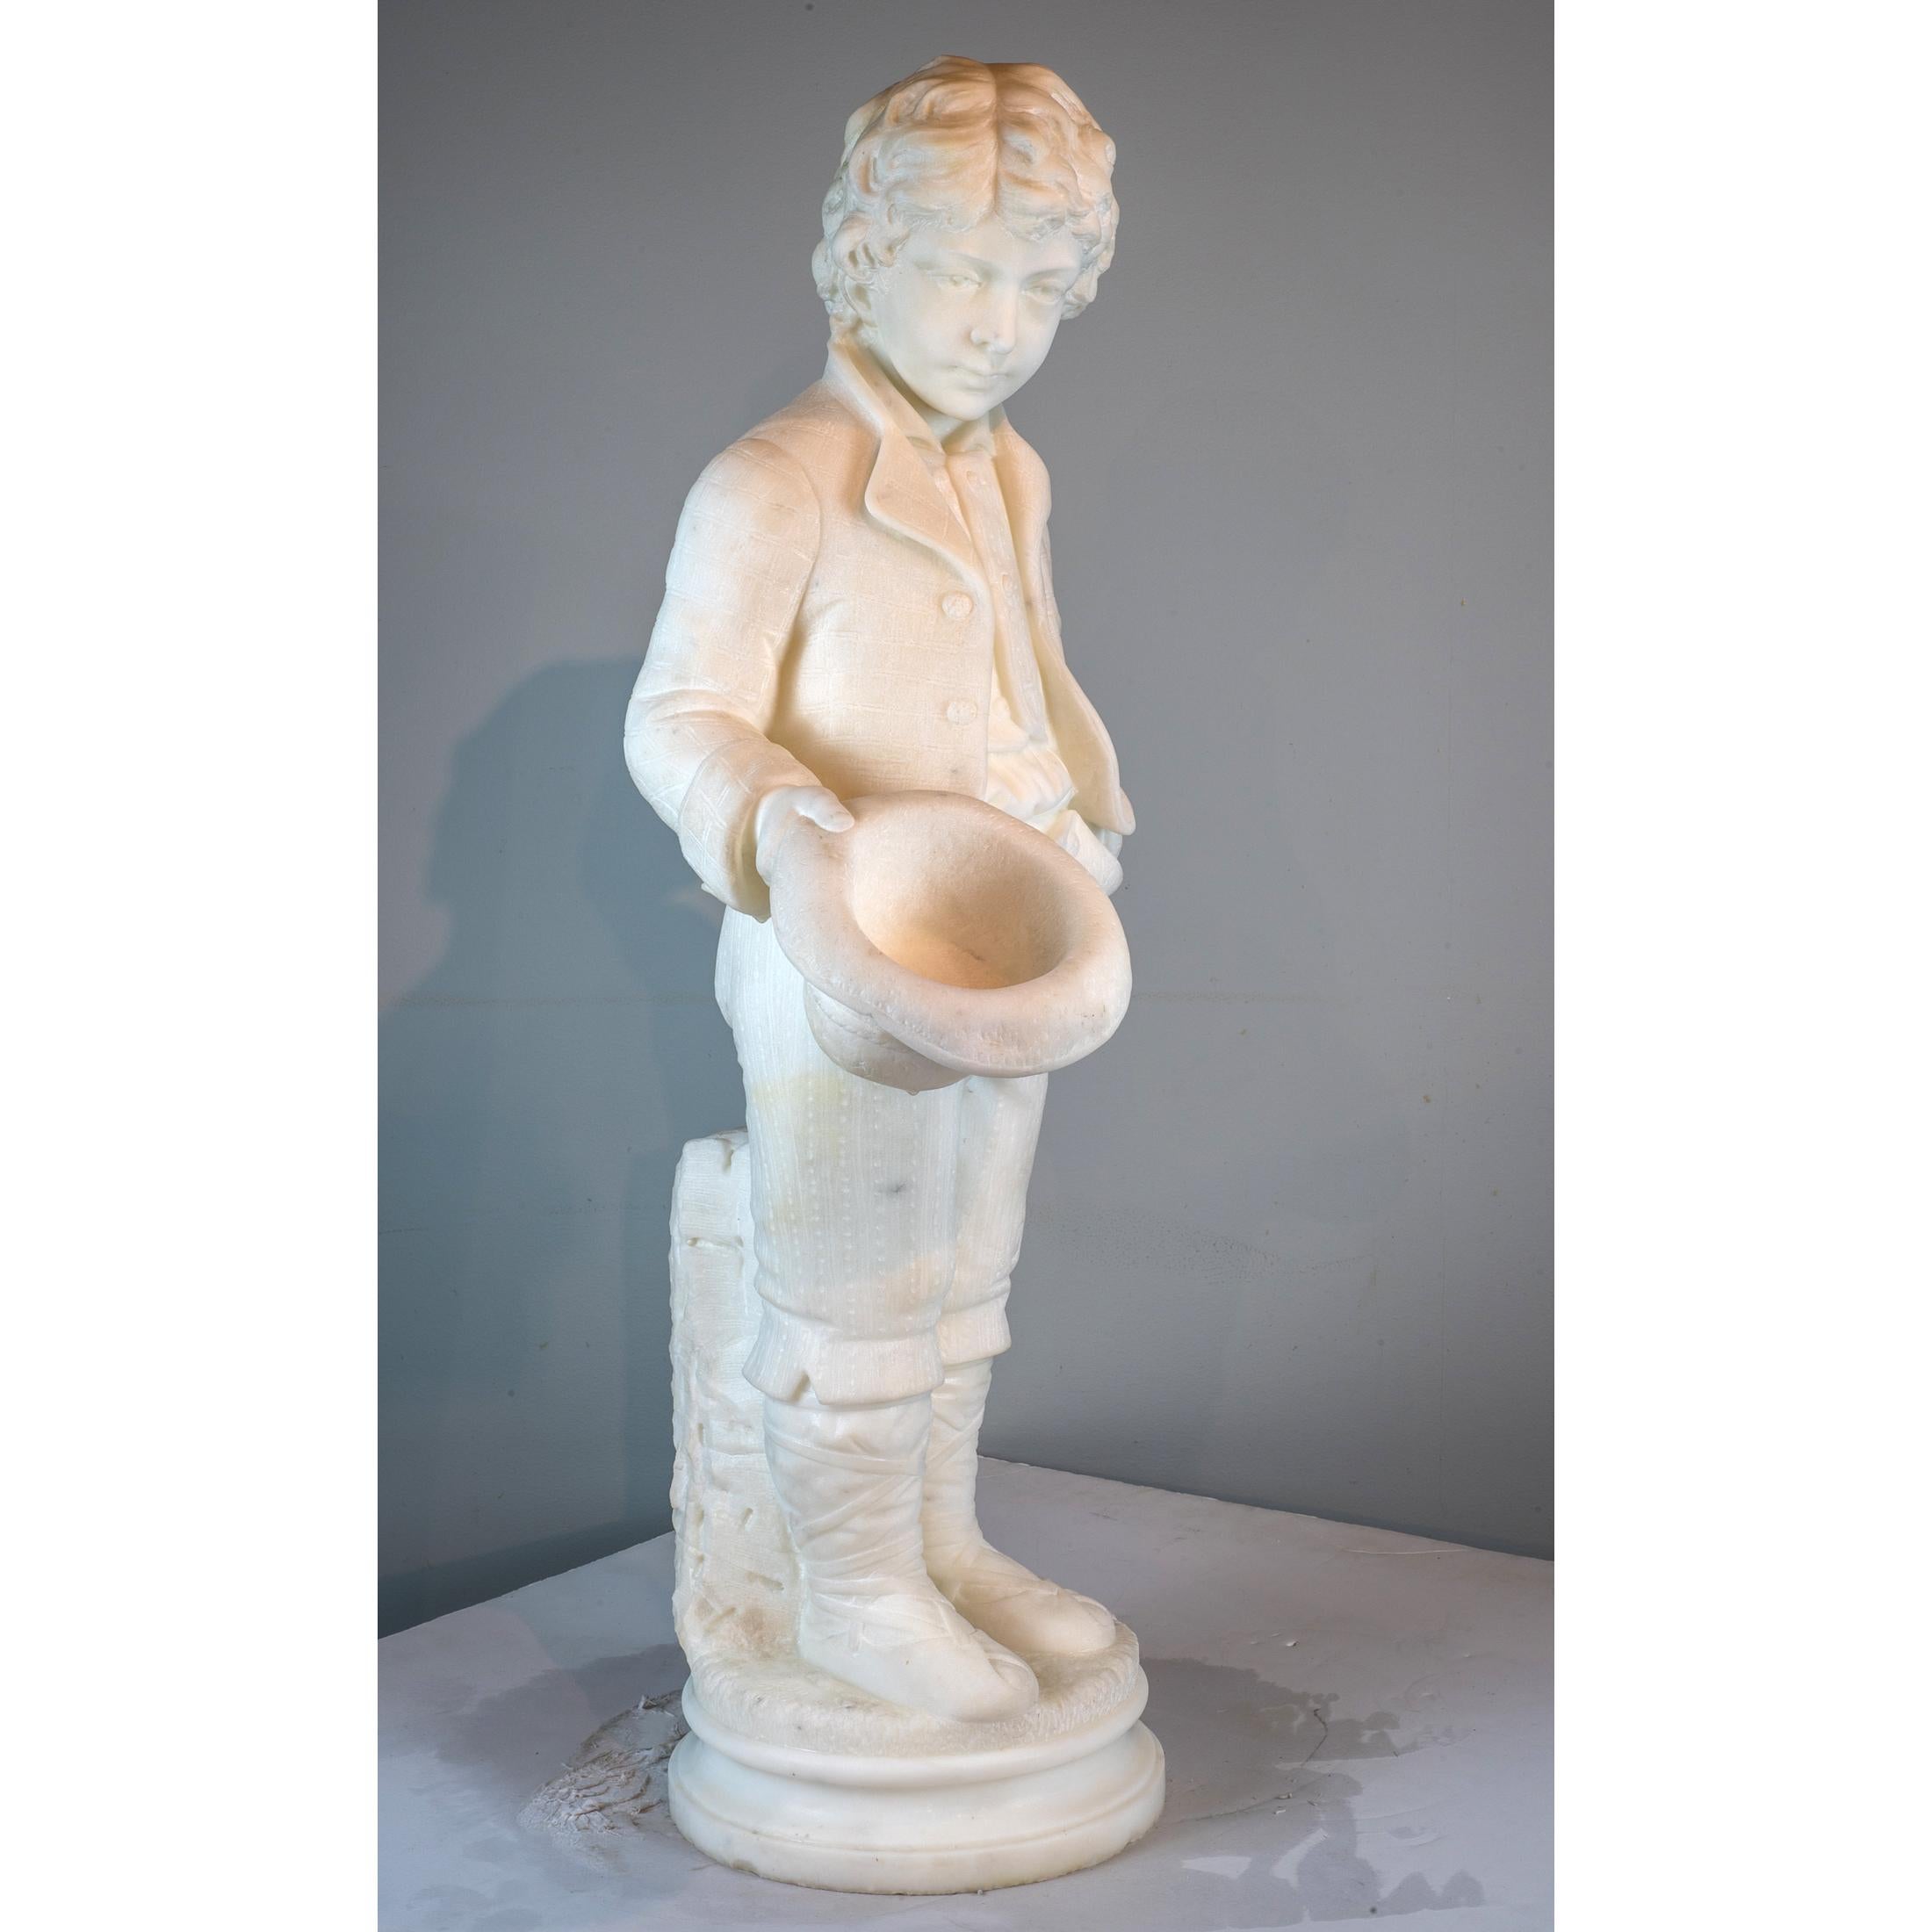 Italian marble figure of a boy carrying a hat, standing on a round plinth with a log behind, signed 'A. Piazza Carrara' 

Artist: Antonio Piazza (Late 19th-Early 20th Century)
Date: Late 19th century
Origin: Italian
Dimension: 33 1/2 x 14 in. x